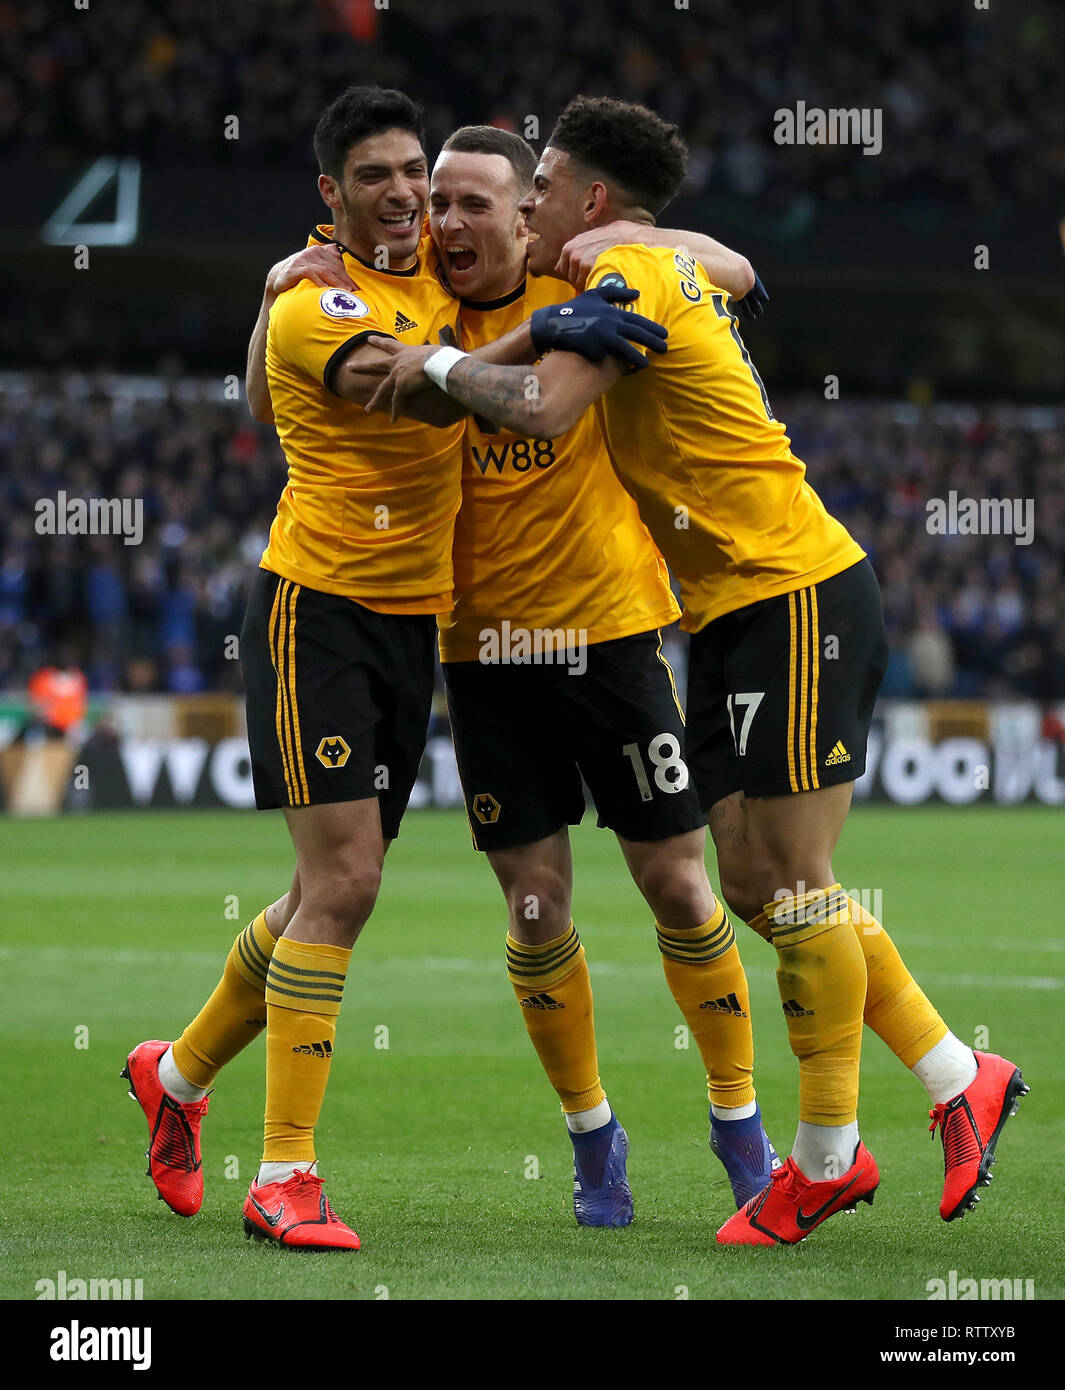 Wolverhampton wanderers fc logo hi-res stock photography and images - Alamy